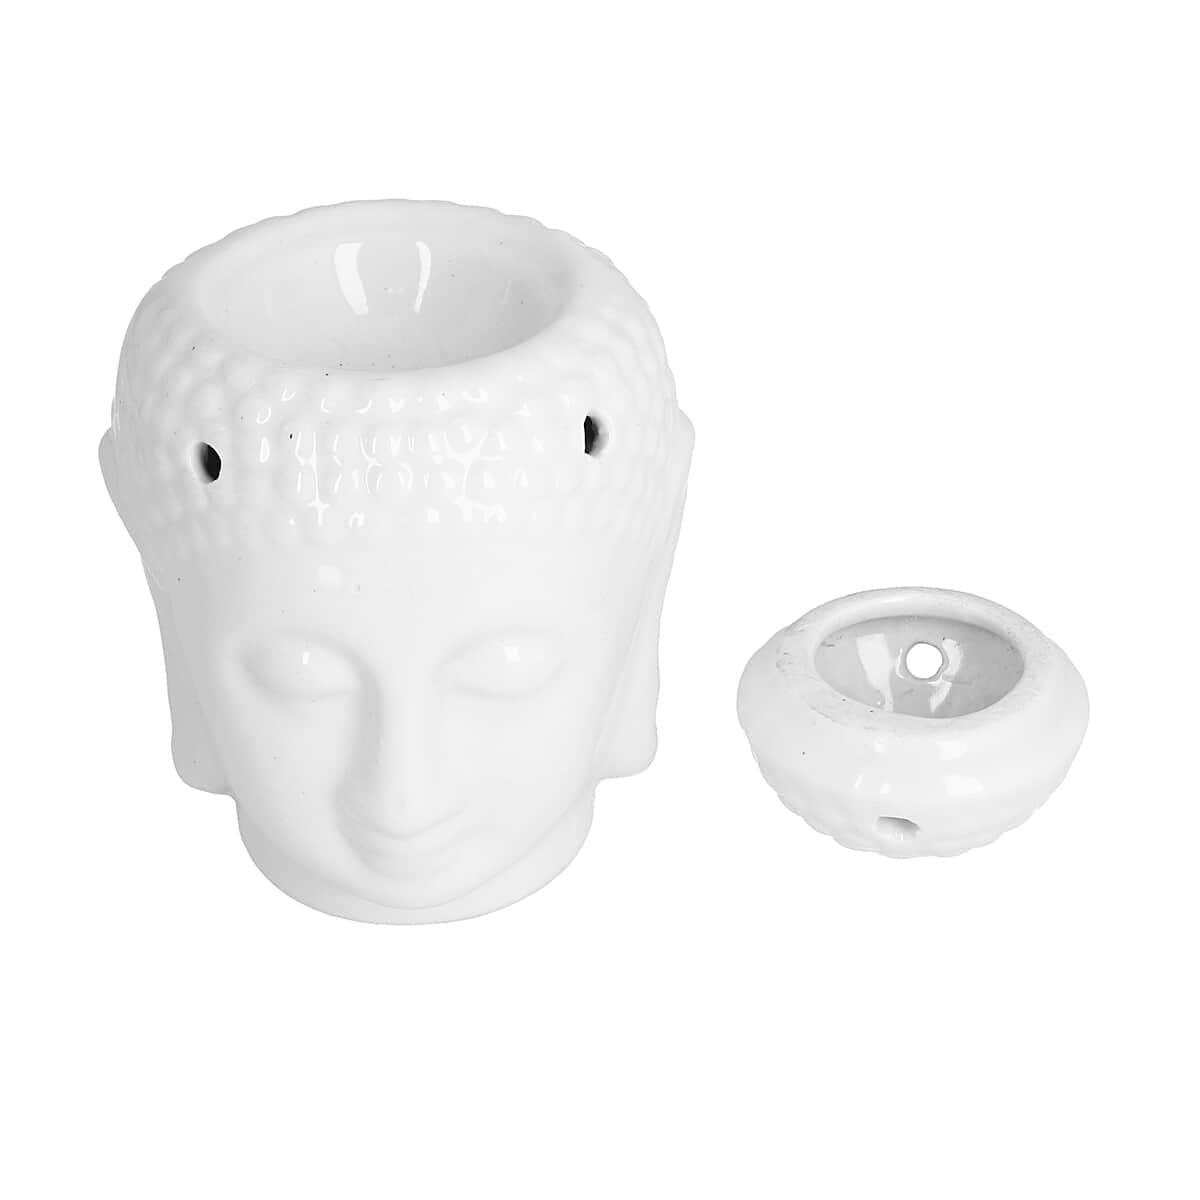 White Ceramic Buddha Head Tealight Candle Holder with Aromatherapy Oil Burner (5.75x4.5x4.25) image number 5